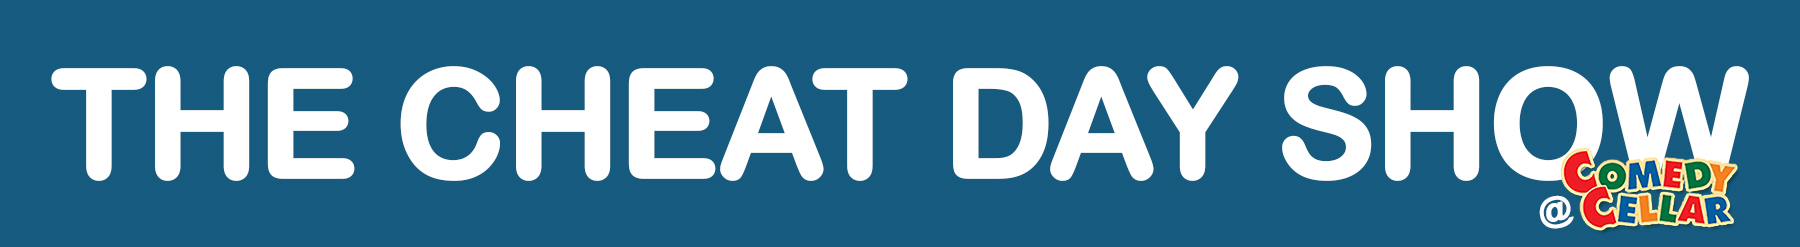 The Cheat Day Show Logo